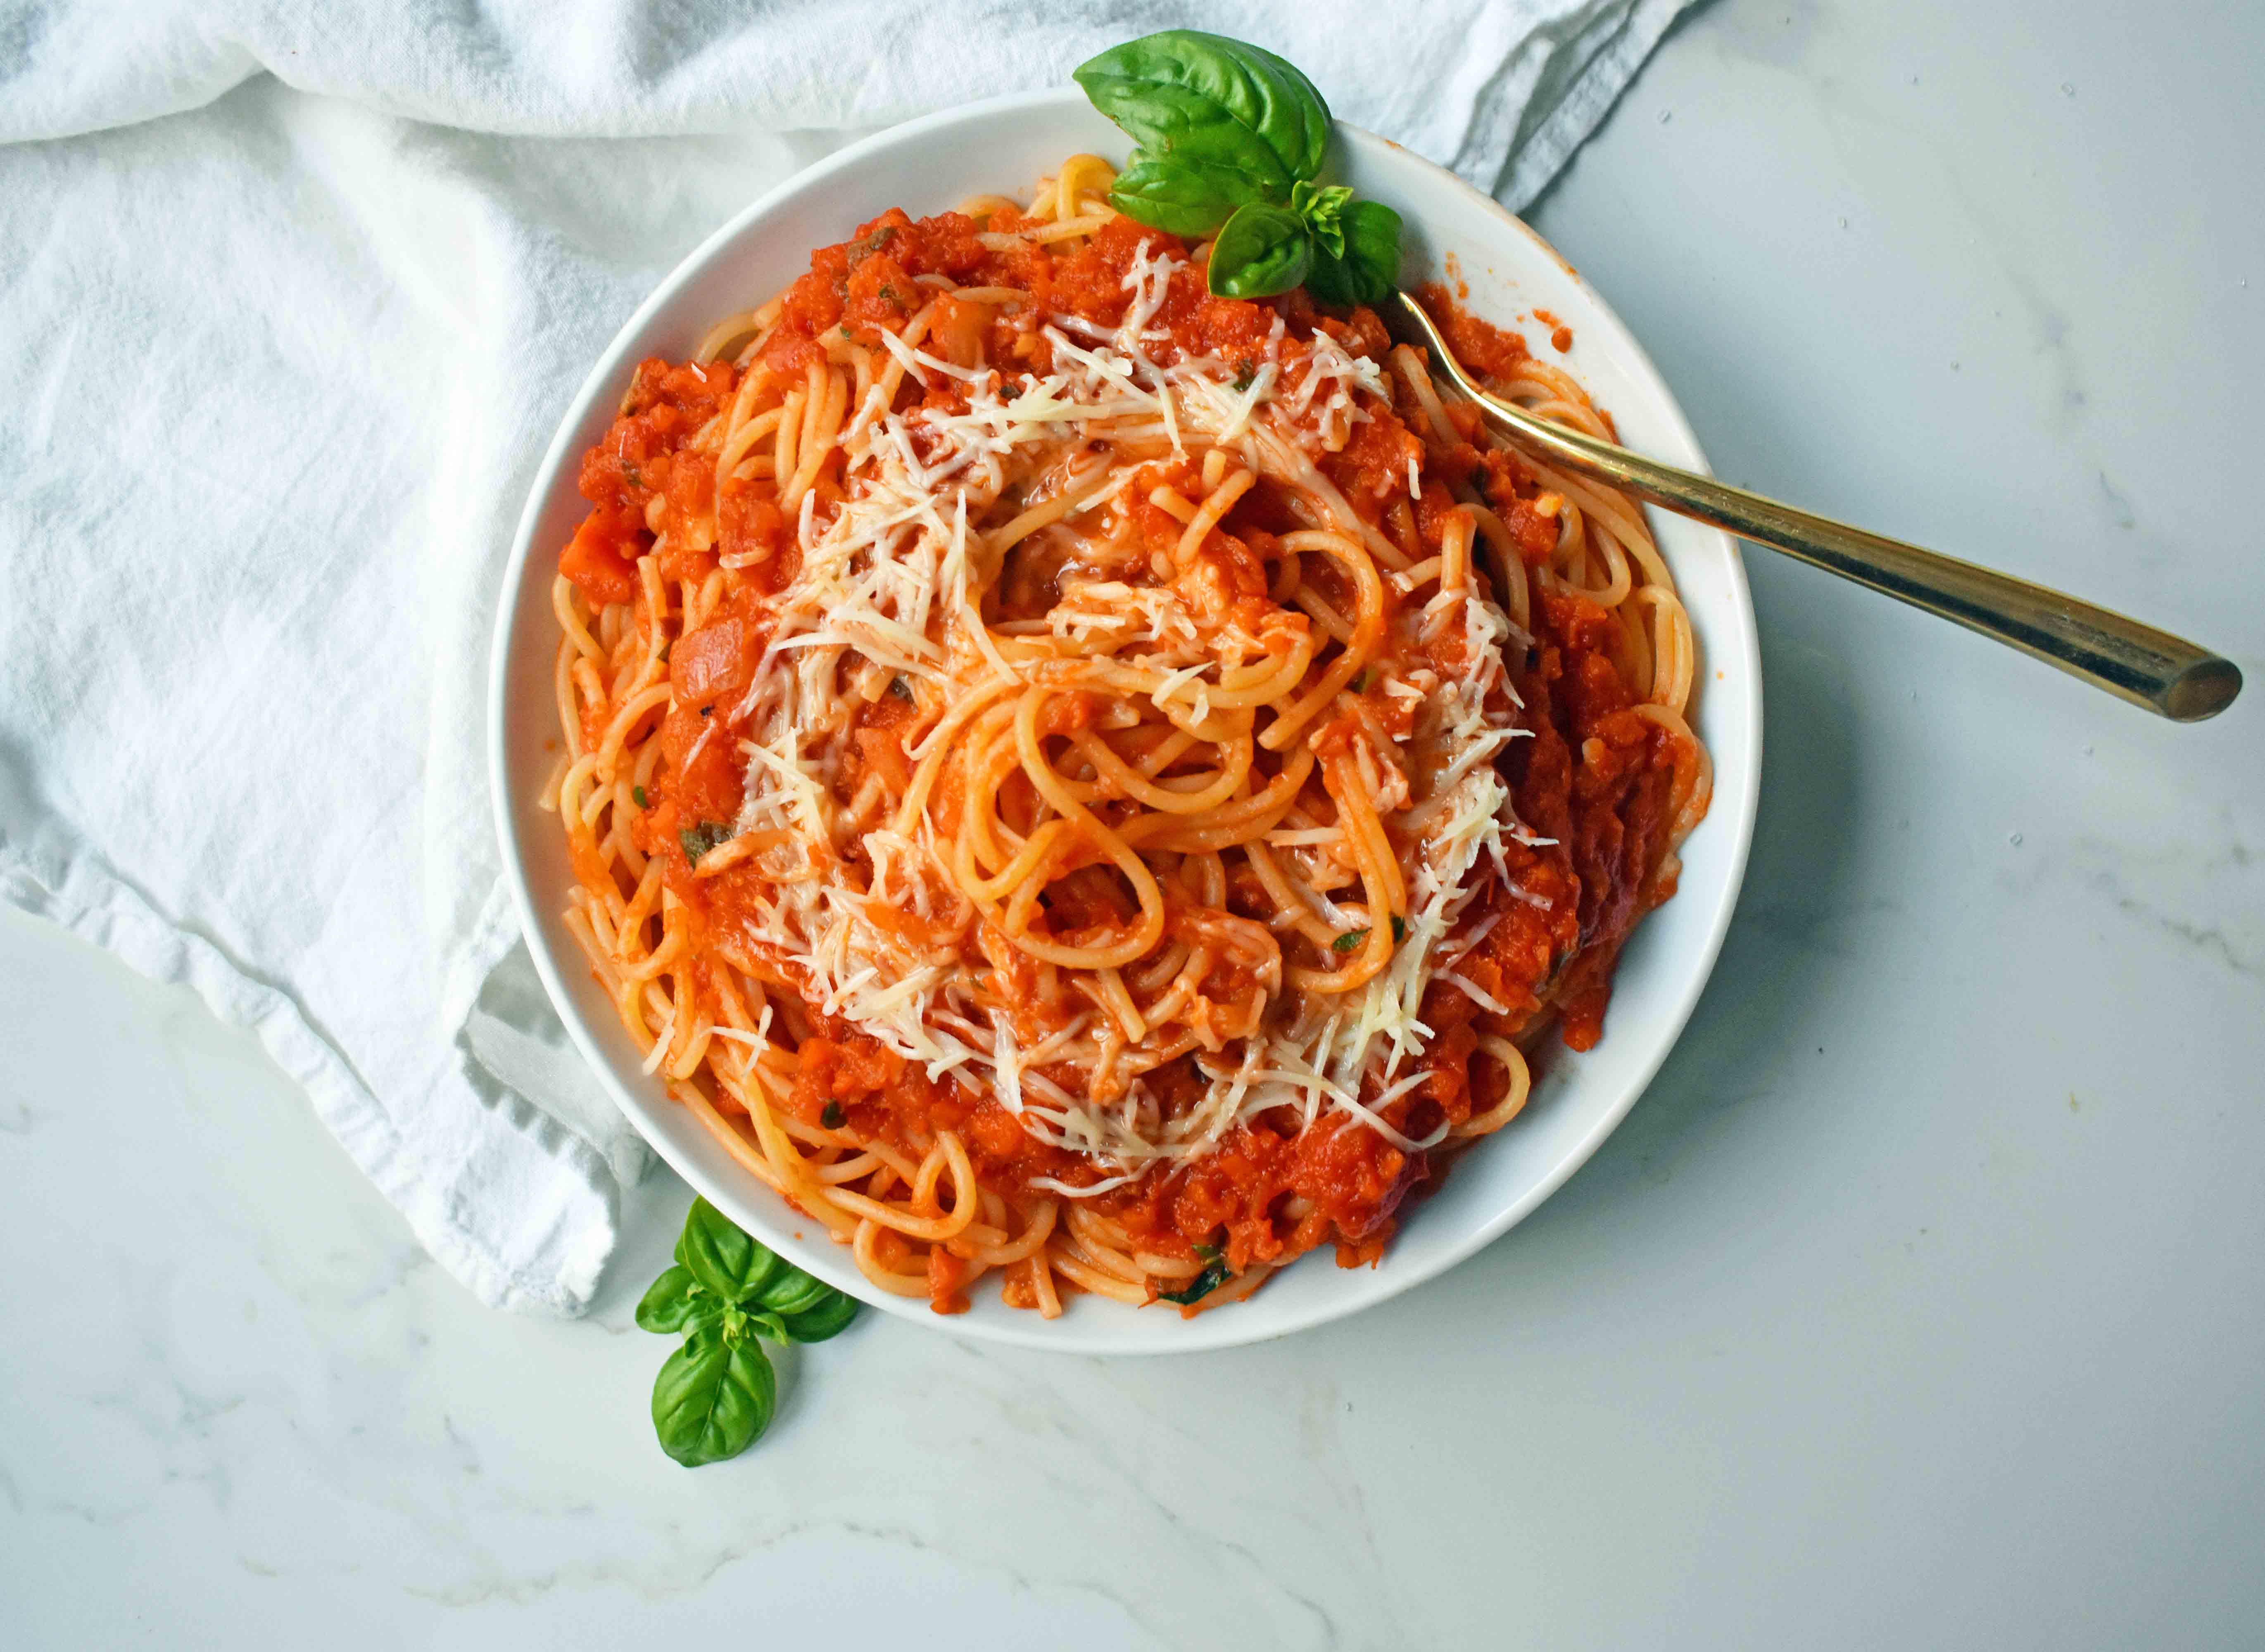 Thick and flavorful homemade spaghetti sauce is packed with Italian flavors in a smooth tomato base. The only marinara sauce you’ll ever need!